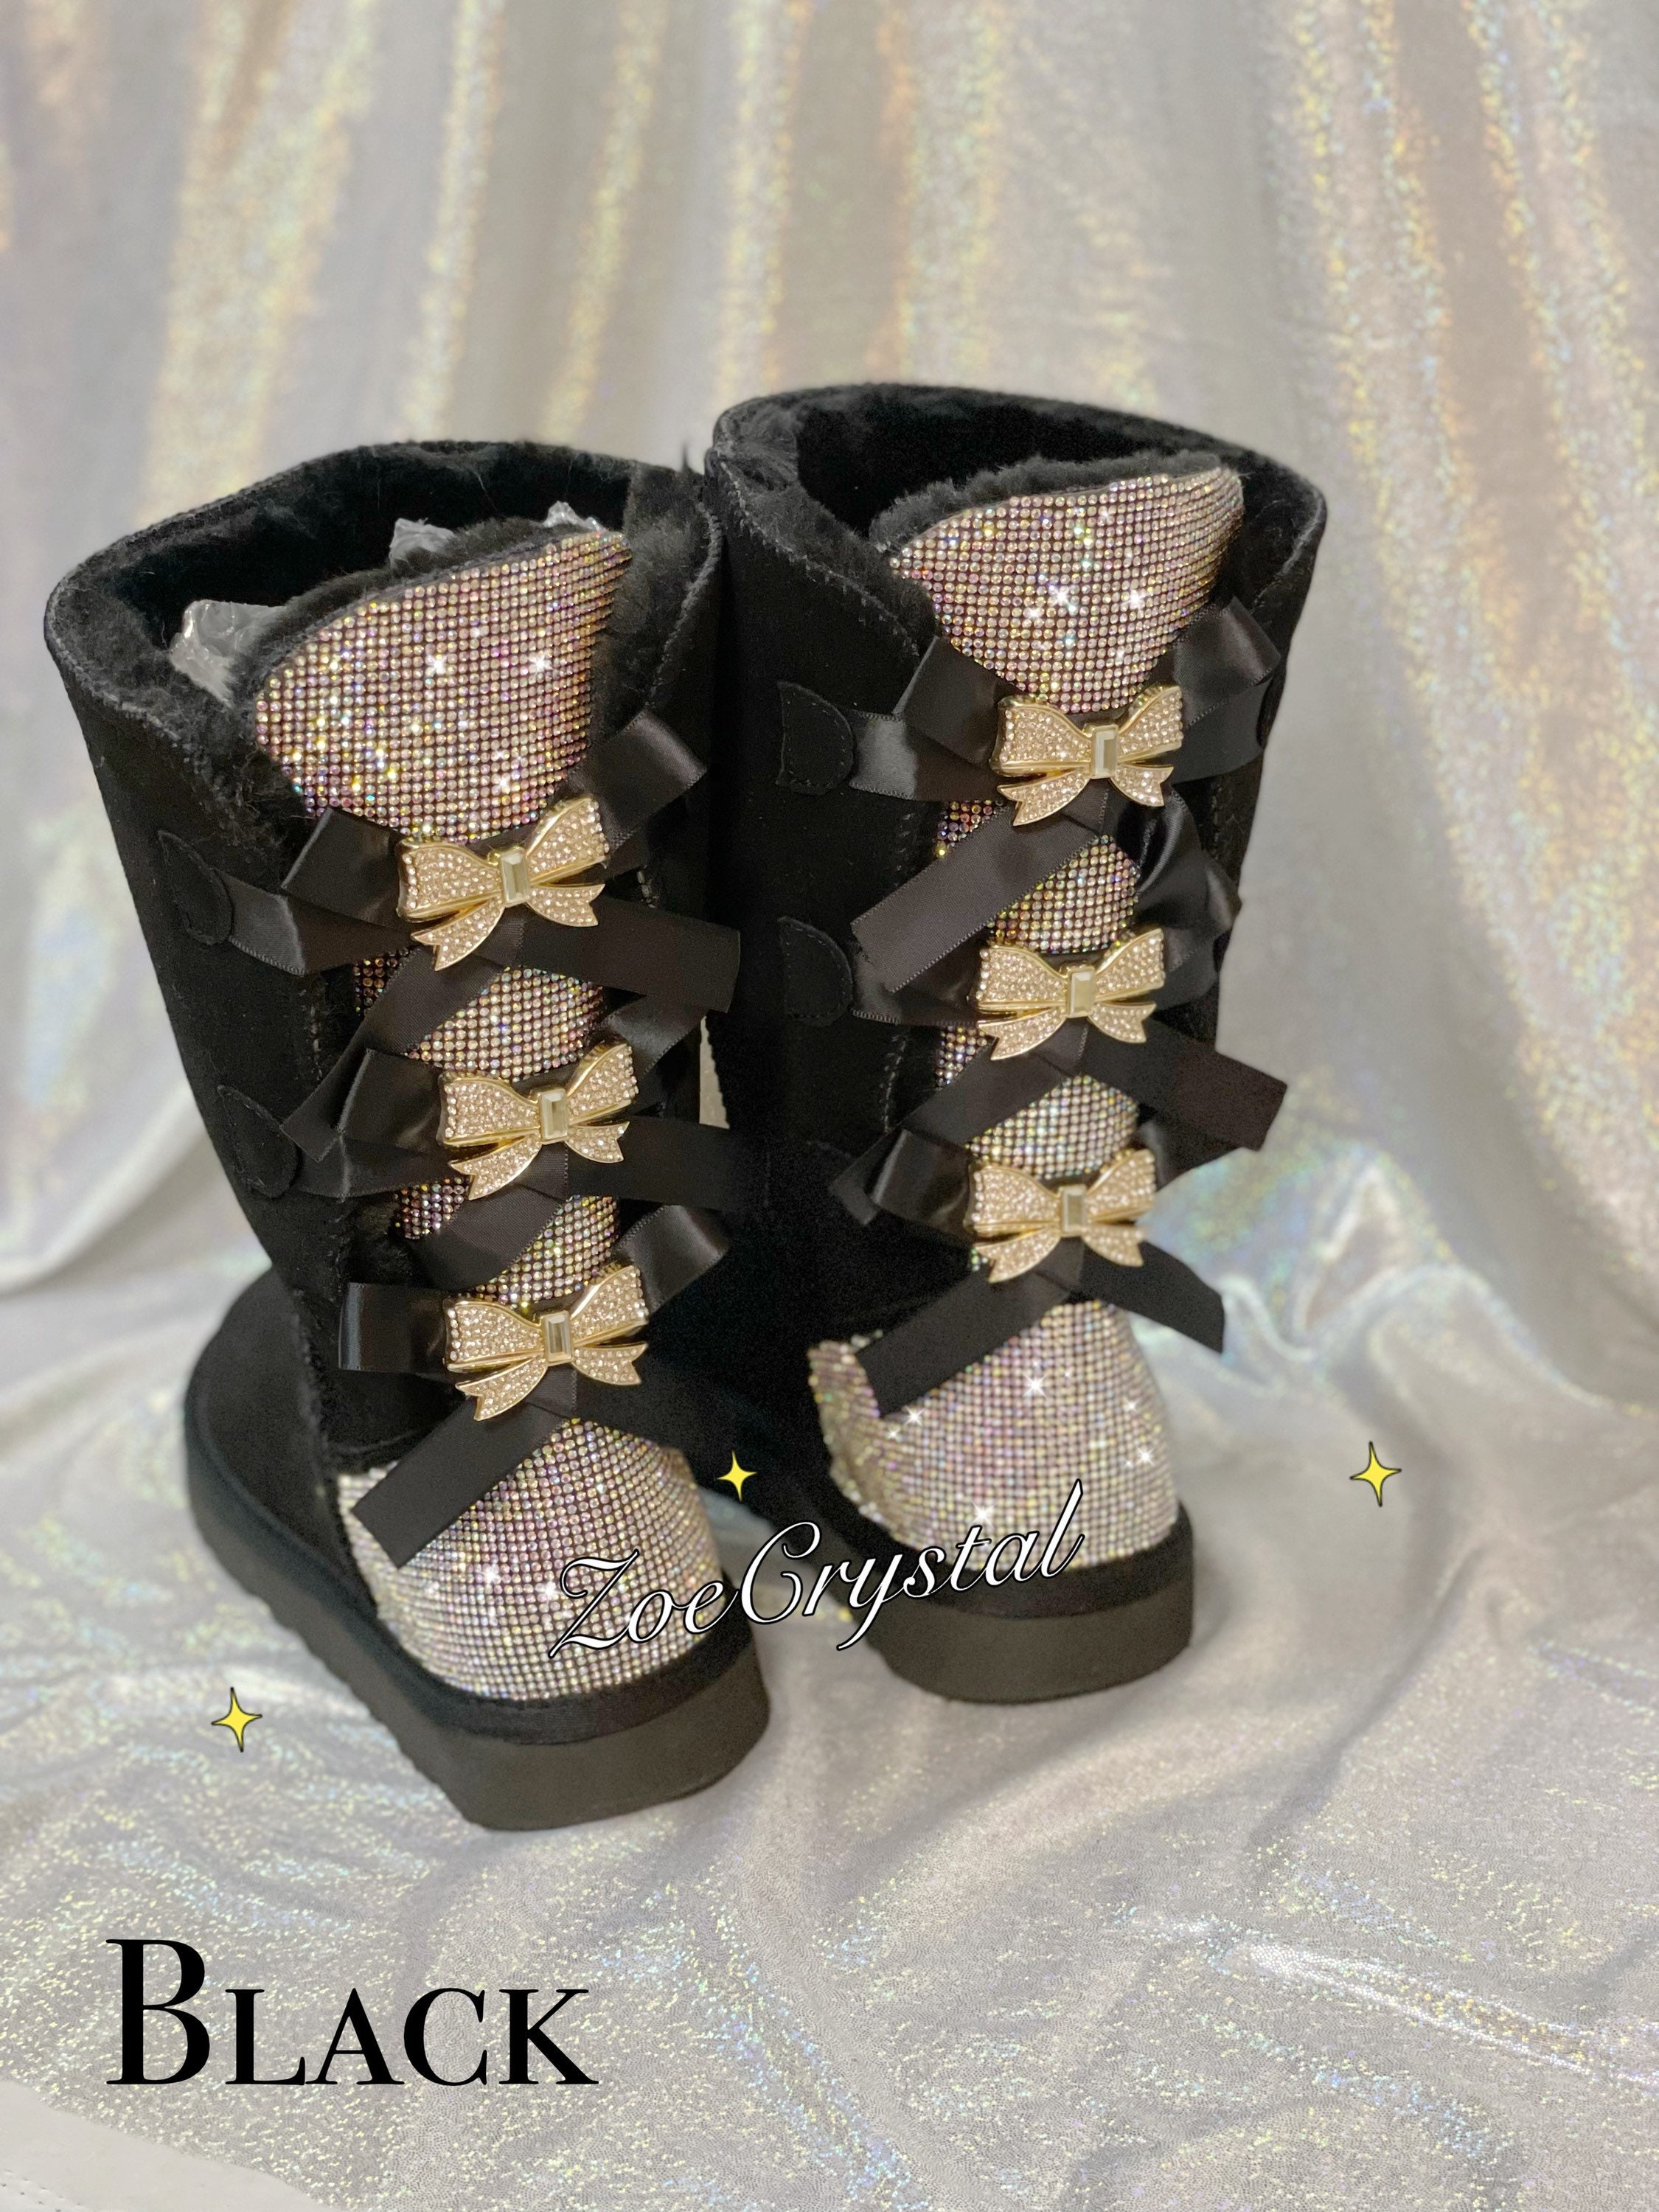  SHOEDEZIGNS Bling 41 Womens Sequin Faux Fur Shearling Snow  Boots Rose Gold/Black 6